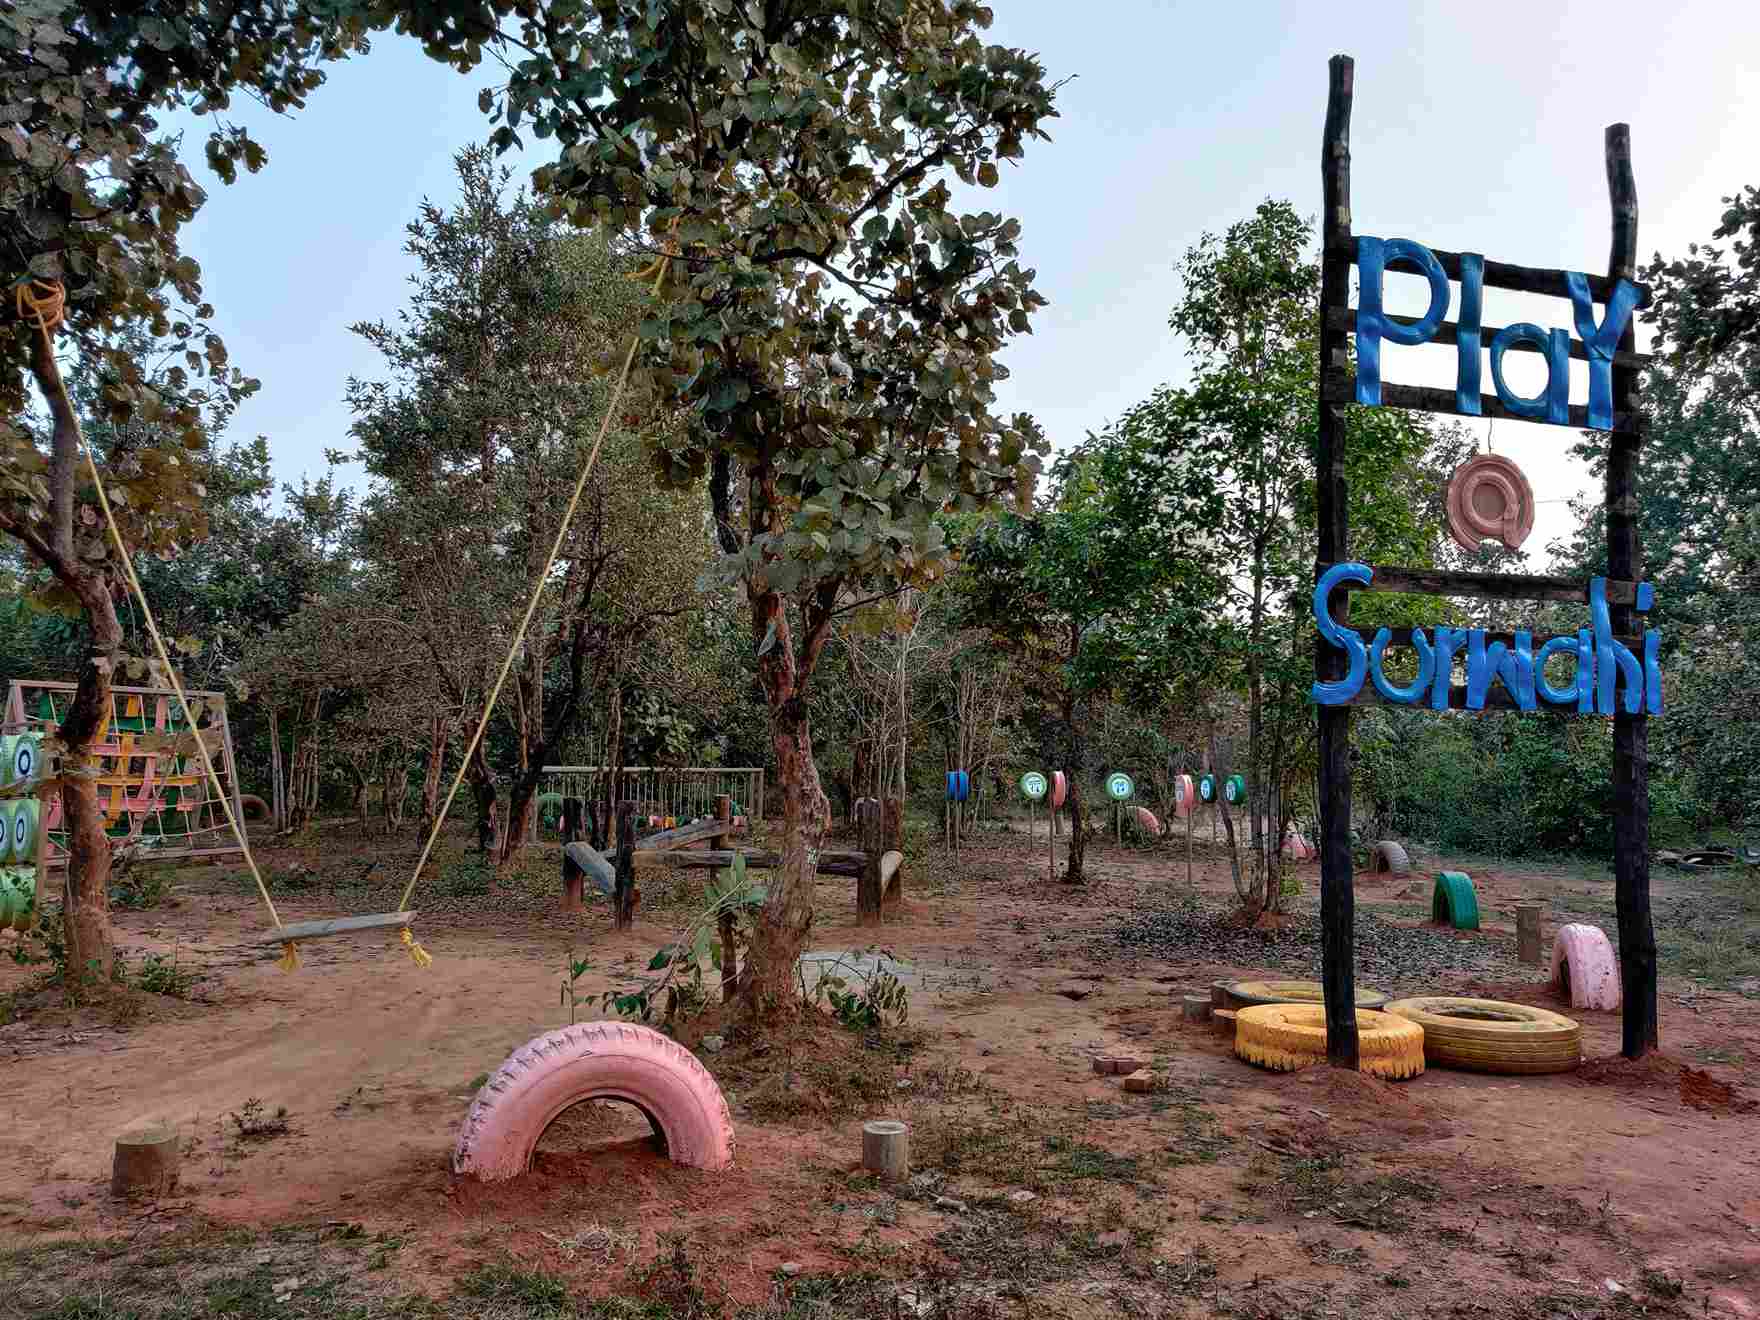 The playground is made with old tyres and wood where children can play.